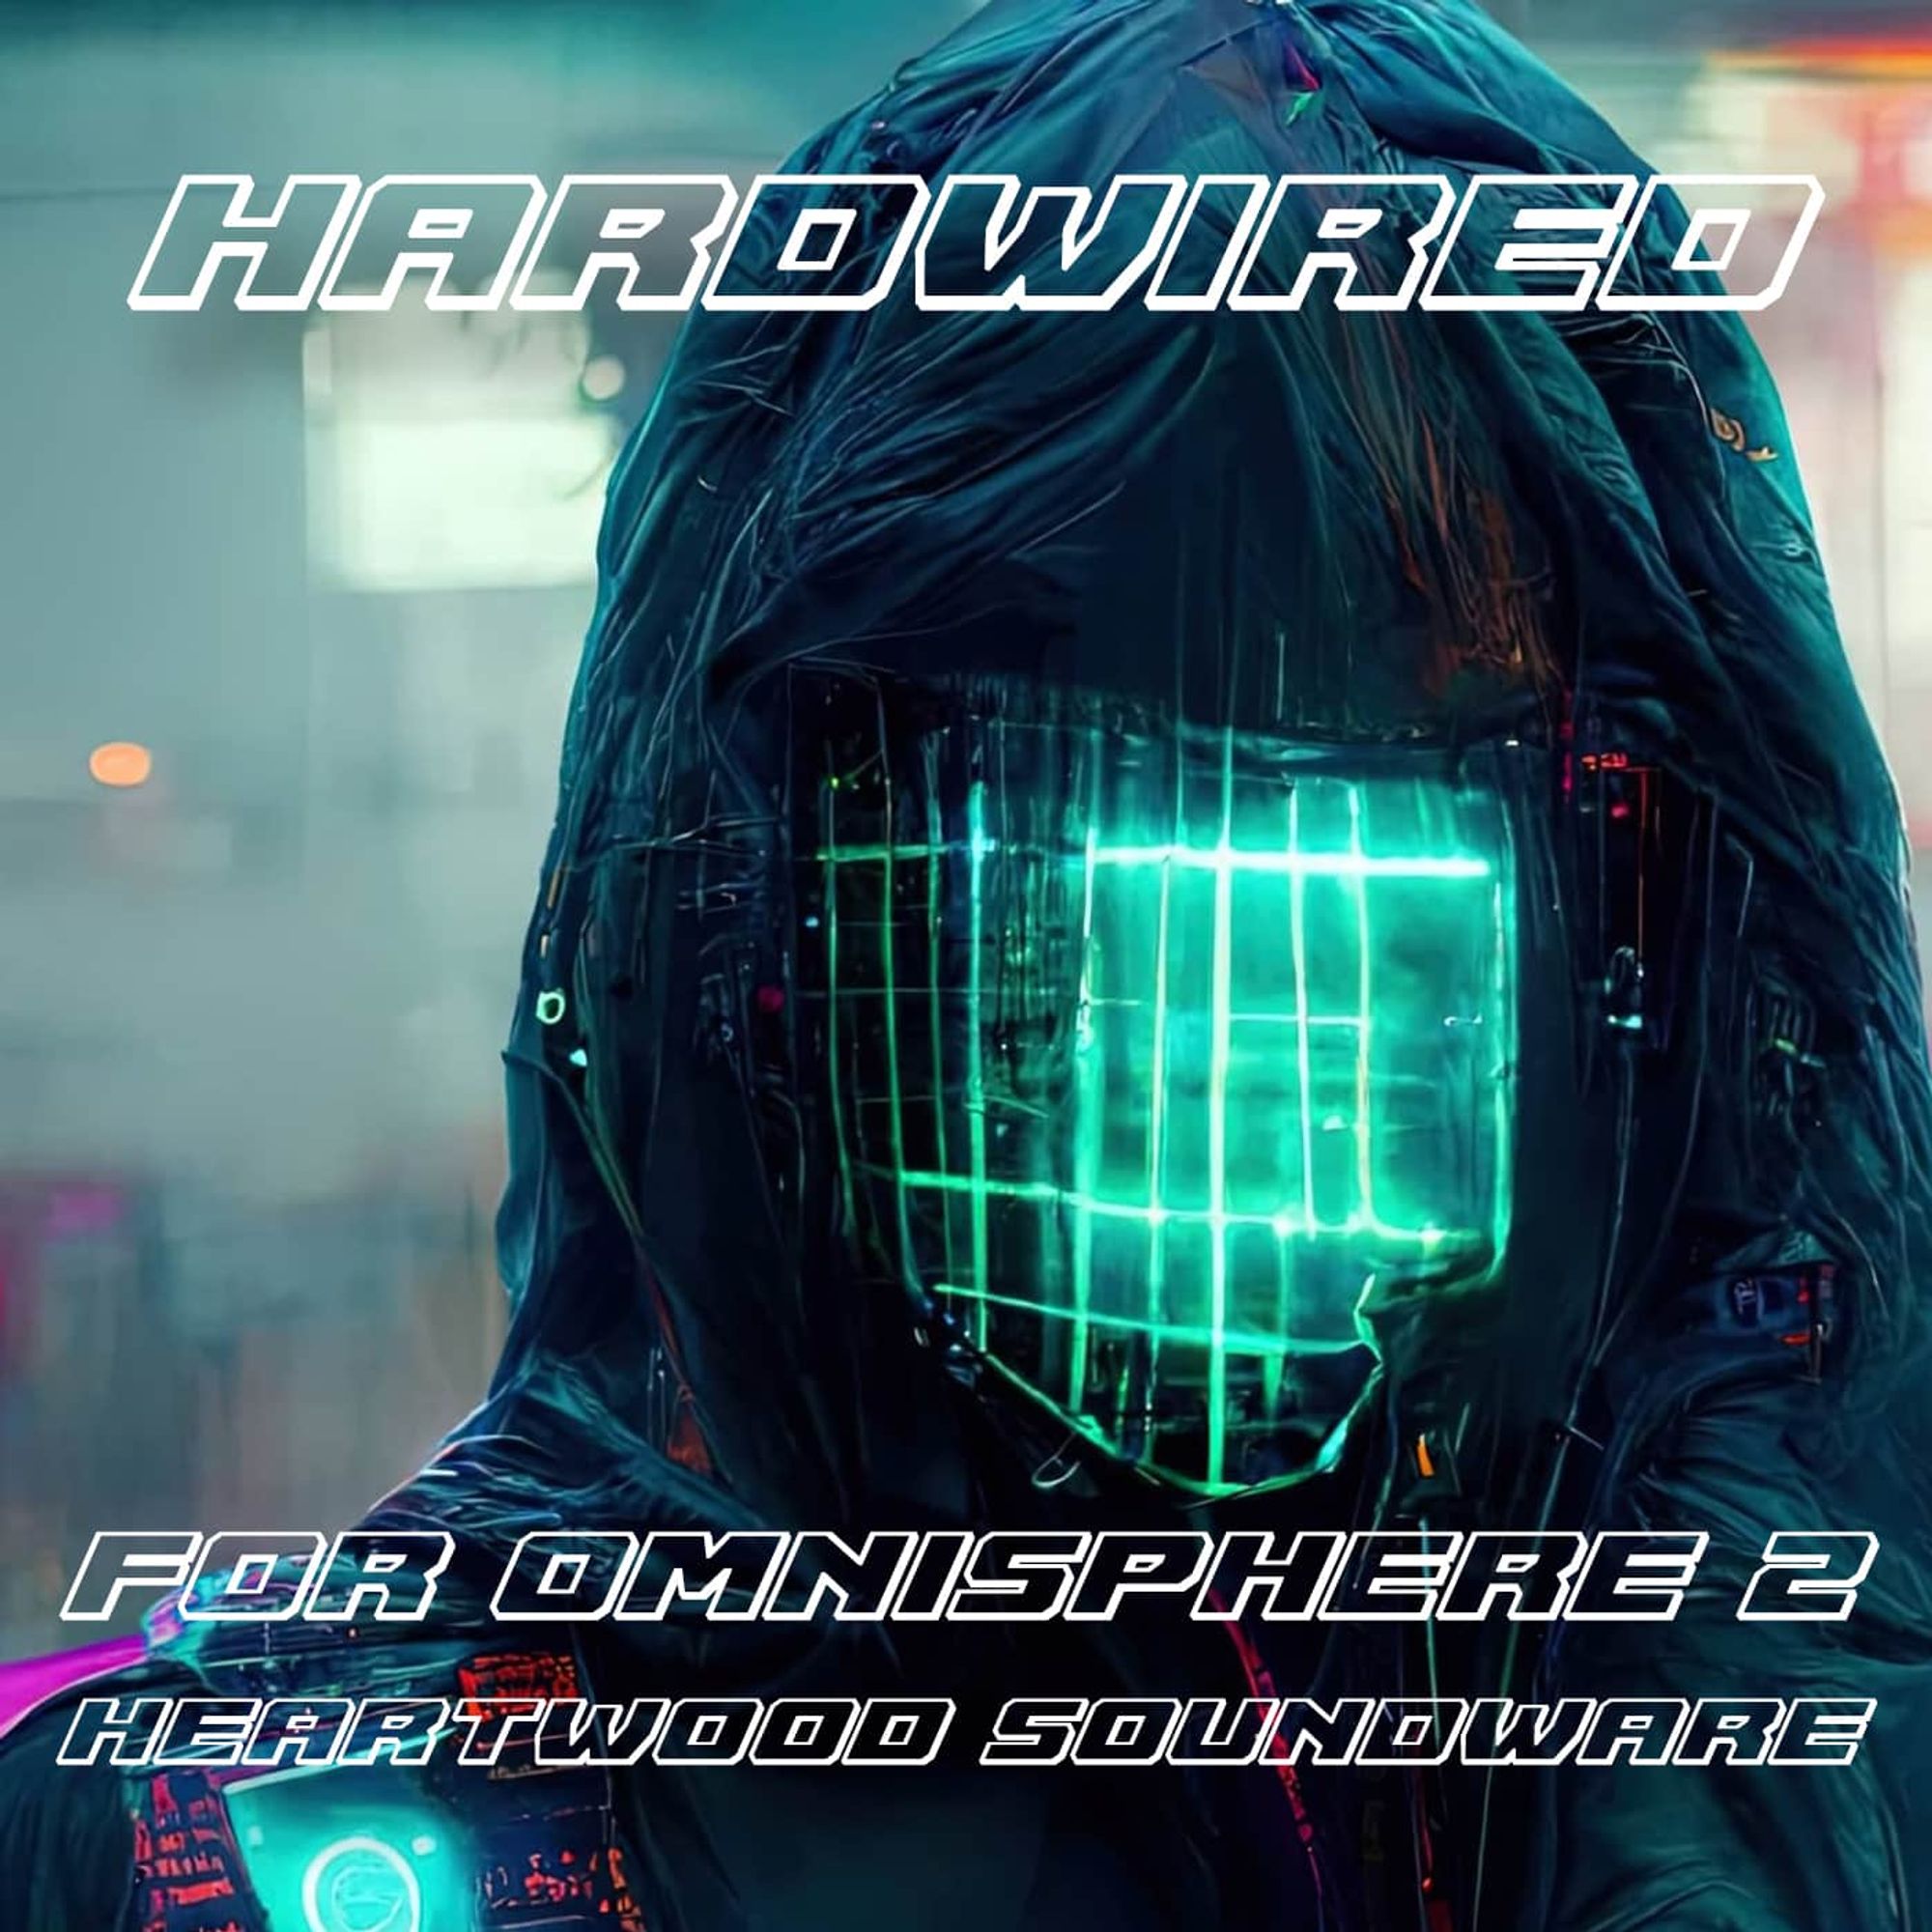 Heartwood Soundware – Hardwired for Omnisphere 2 | Triple Spiral Audio